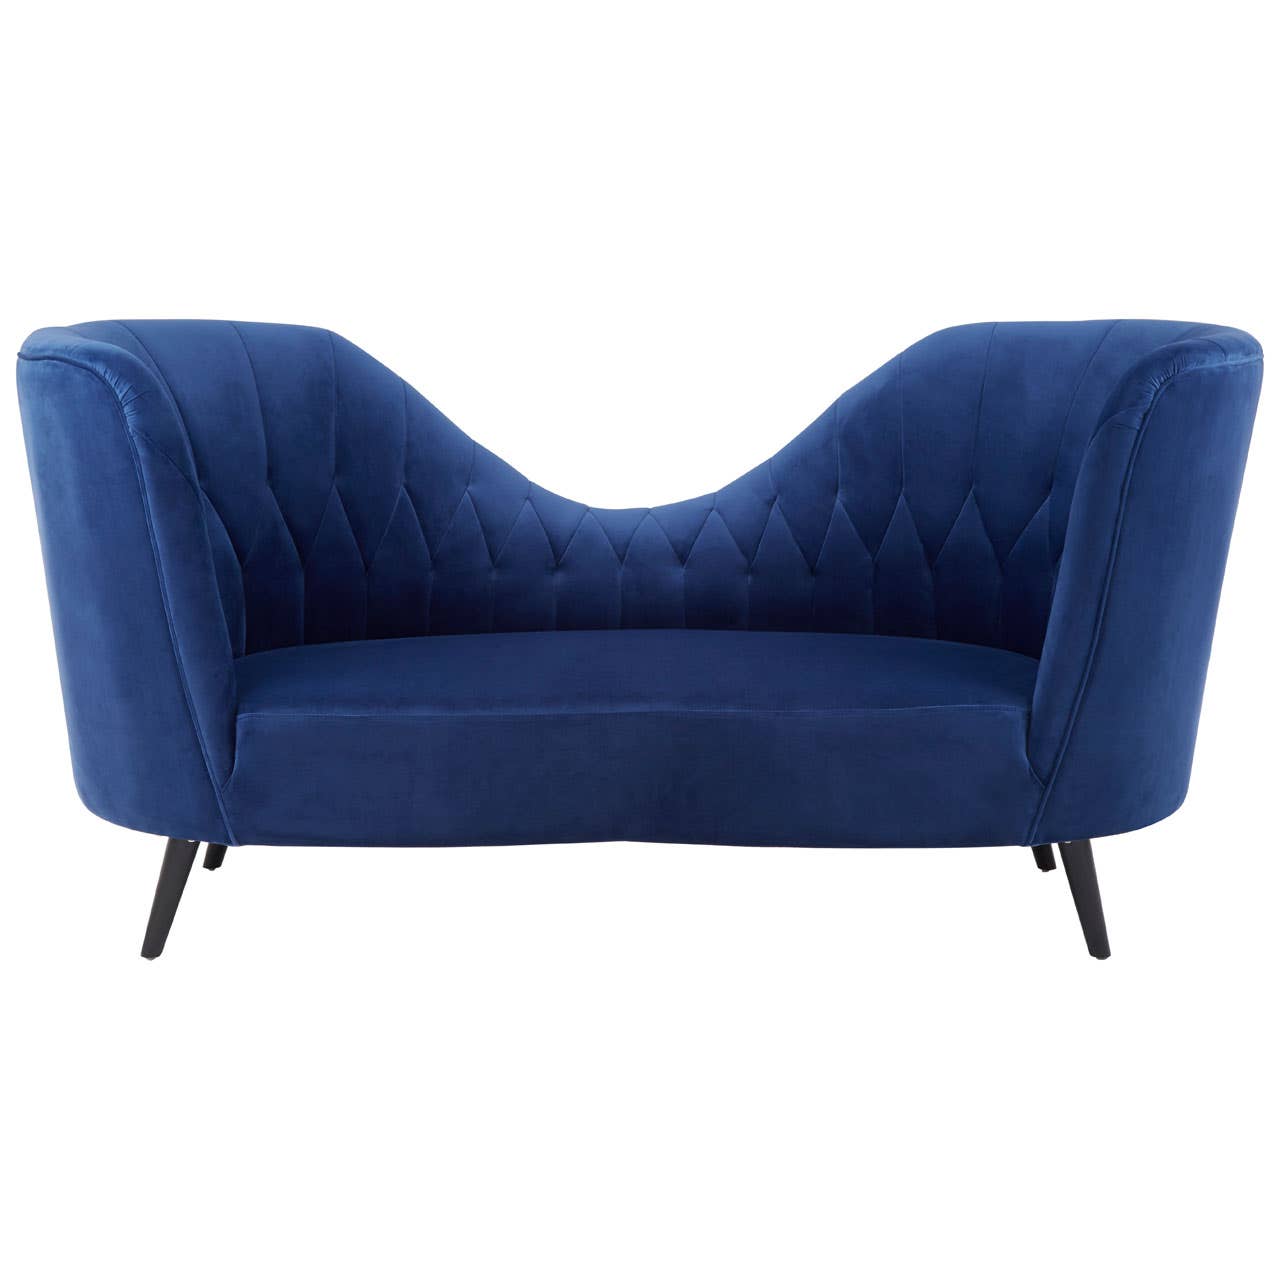 Seraphina Elegant Blueberry Blue Chaise Lounge Occasional Statement Chair